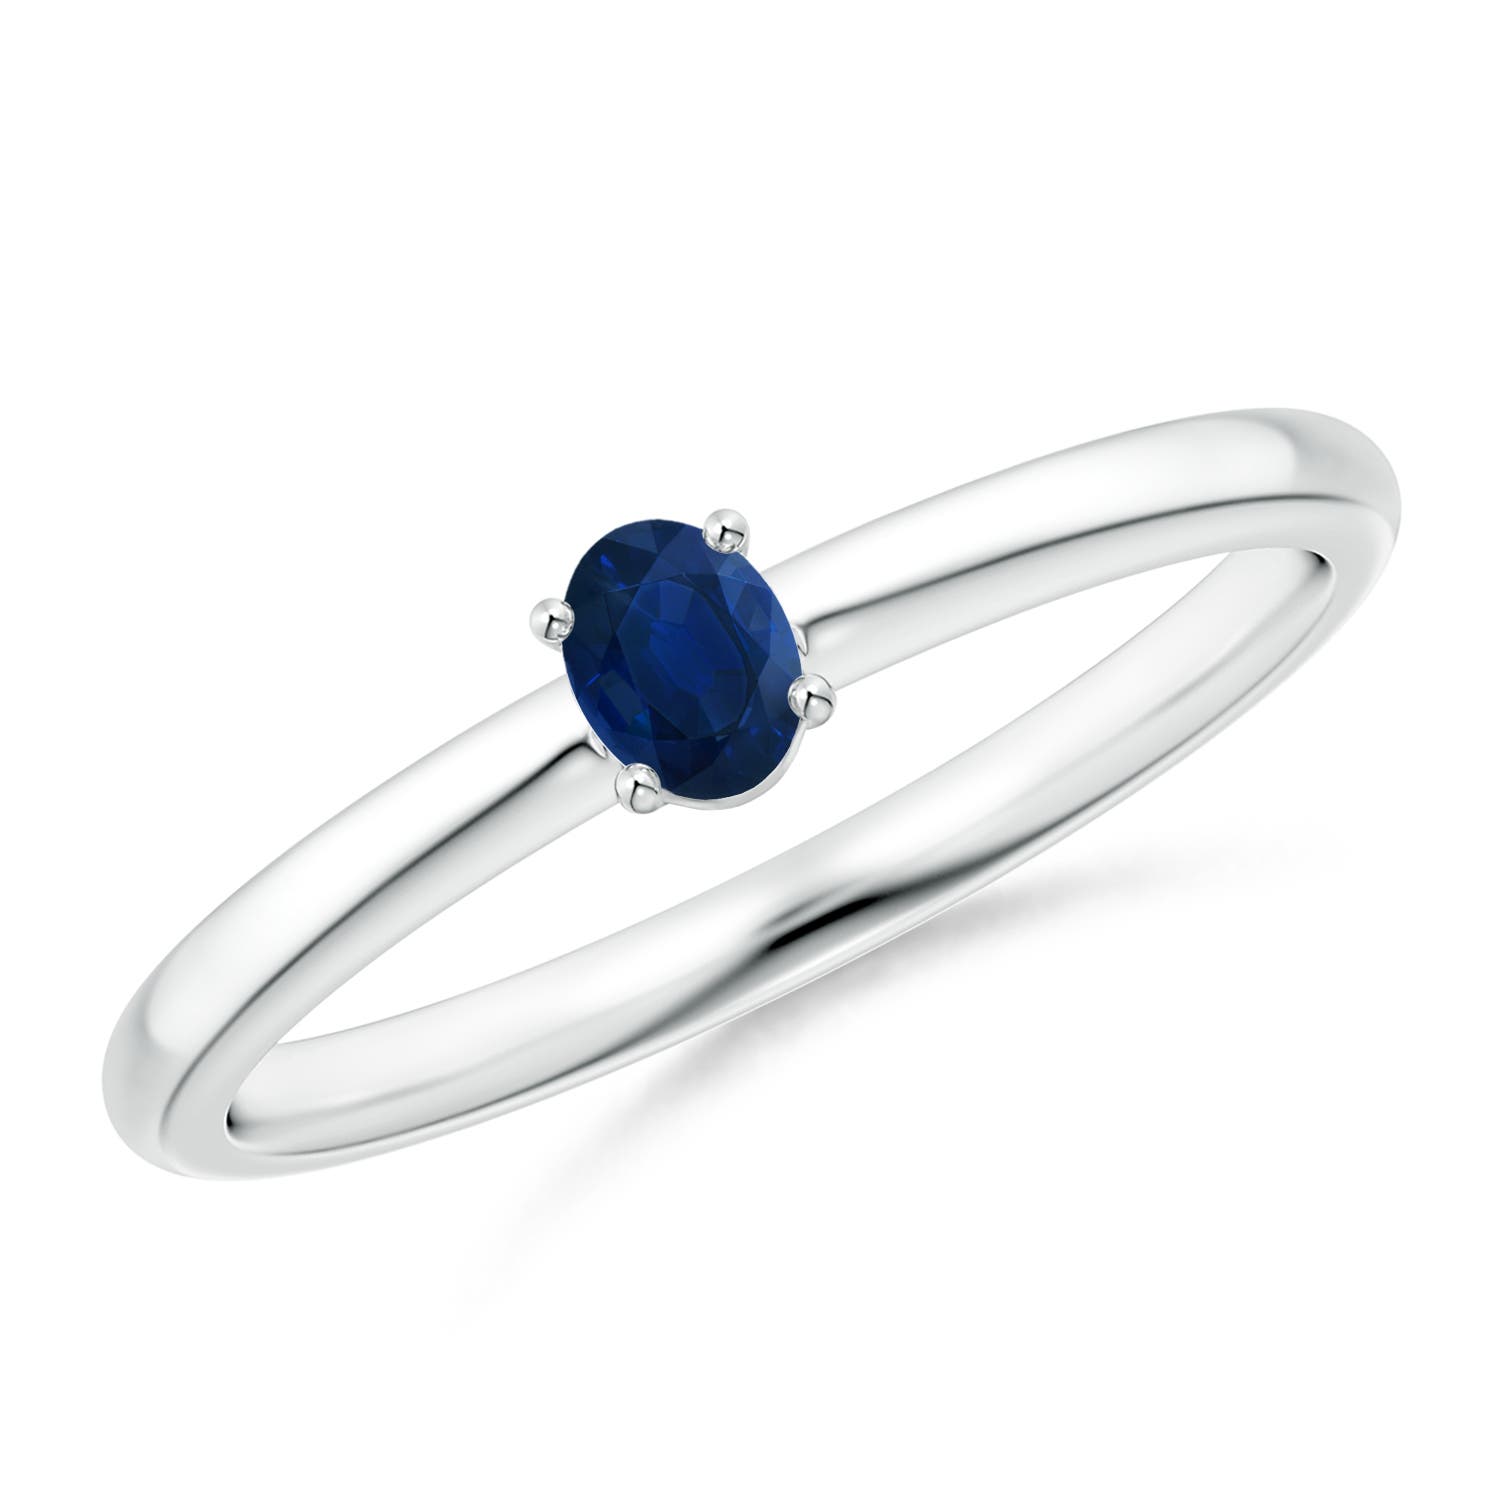 AA - Blue Sapphire / 0.2 CT / 14 KT White Gold